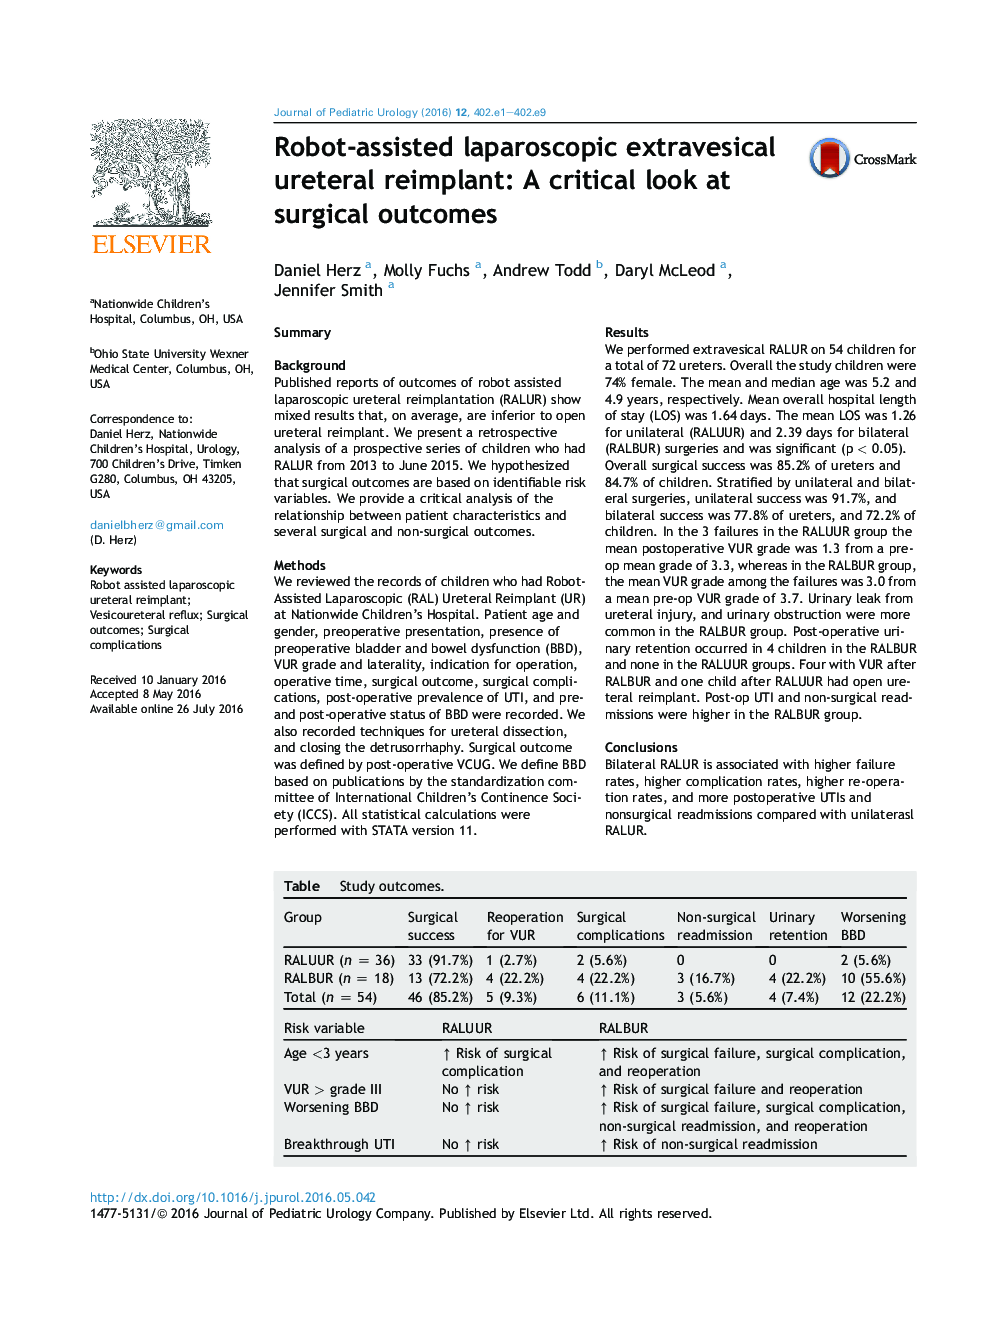 Robot-assisted laparoscopic extravesical ureteral reimplant: A critical look at surgical outcomes